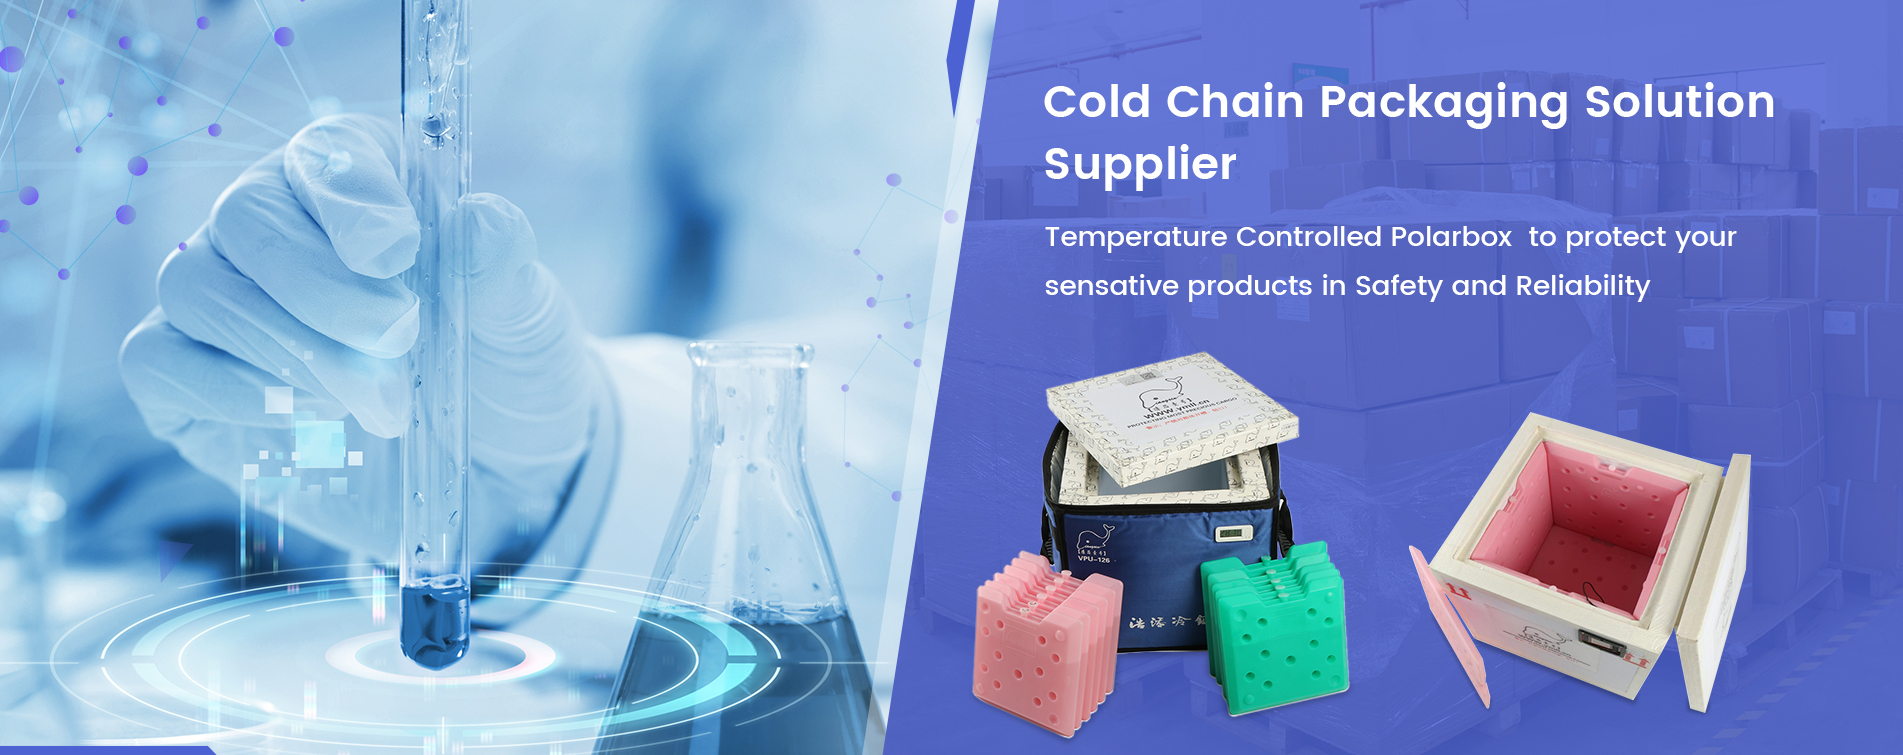 Cold Chain Packing Soultion Supplier